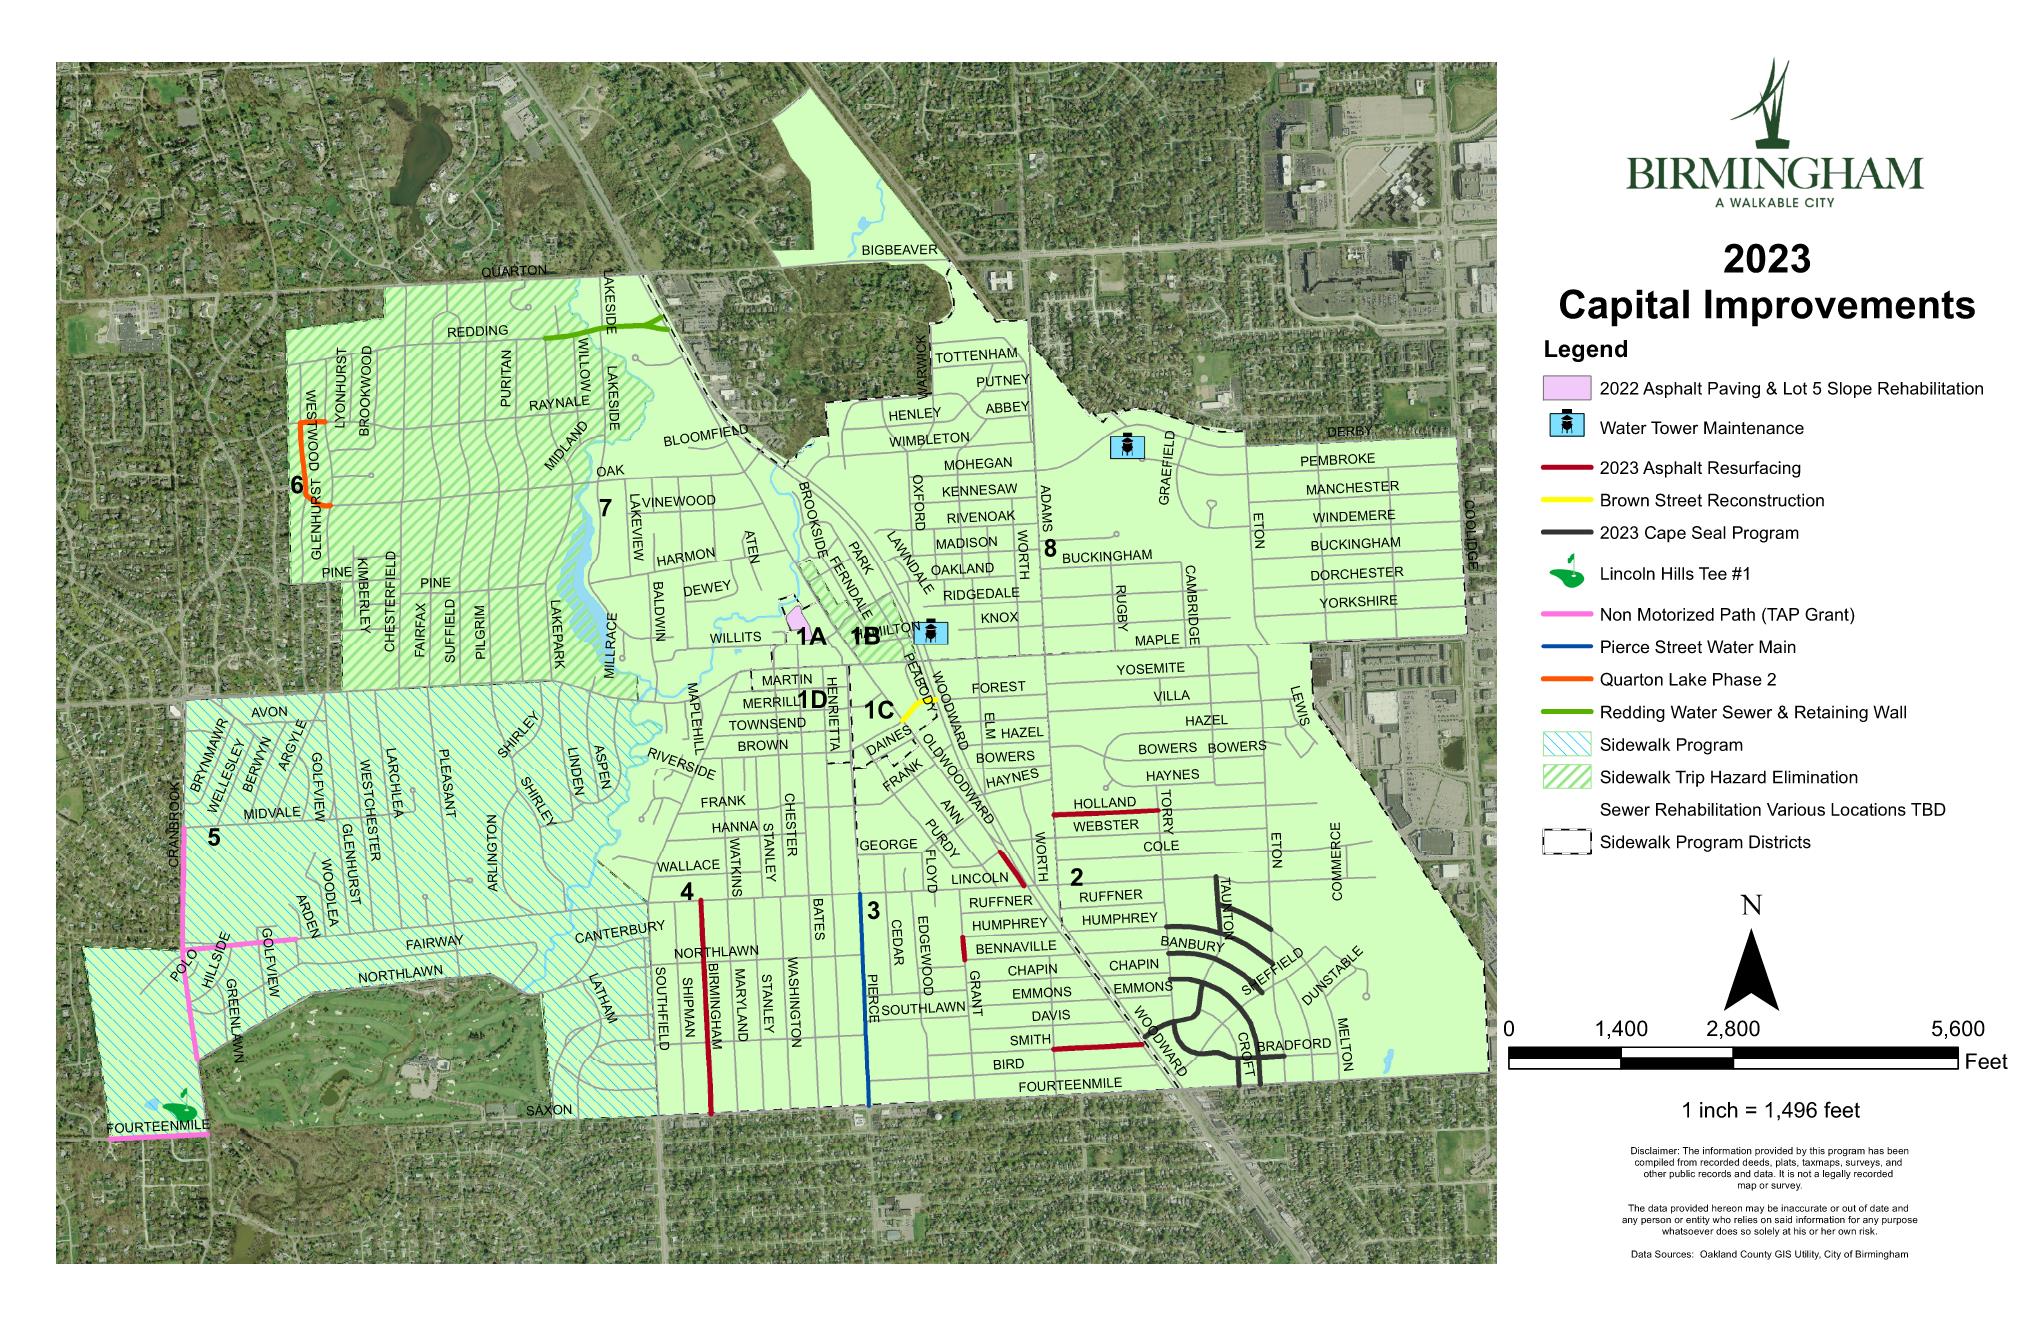 Map showing areas for 2023 Capital Improvements